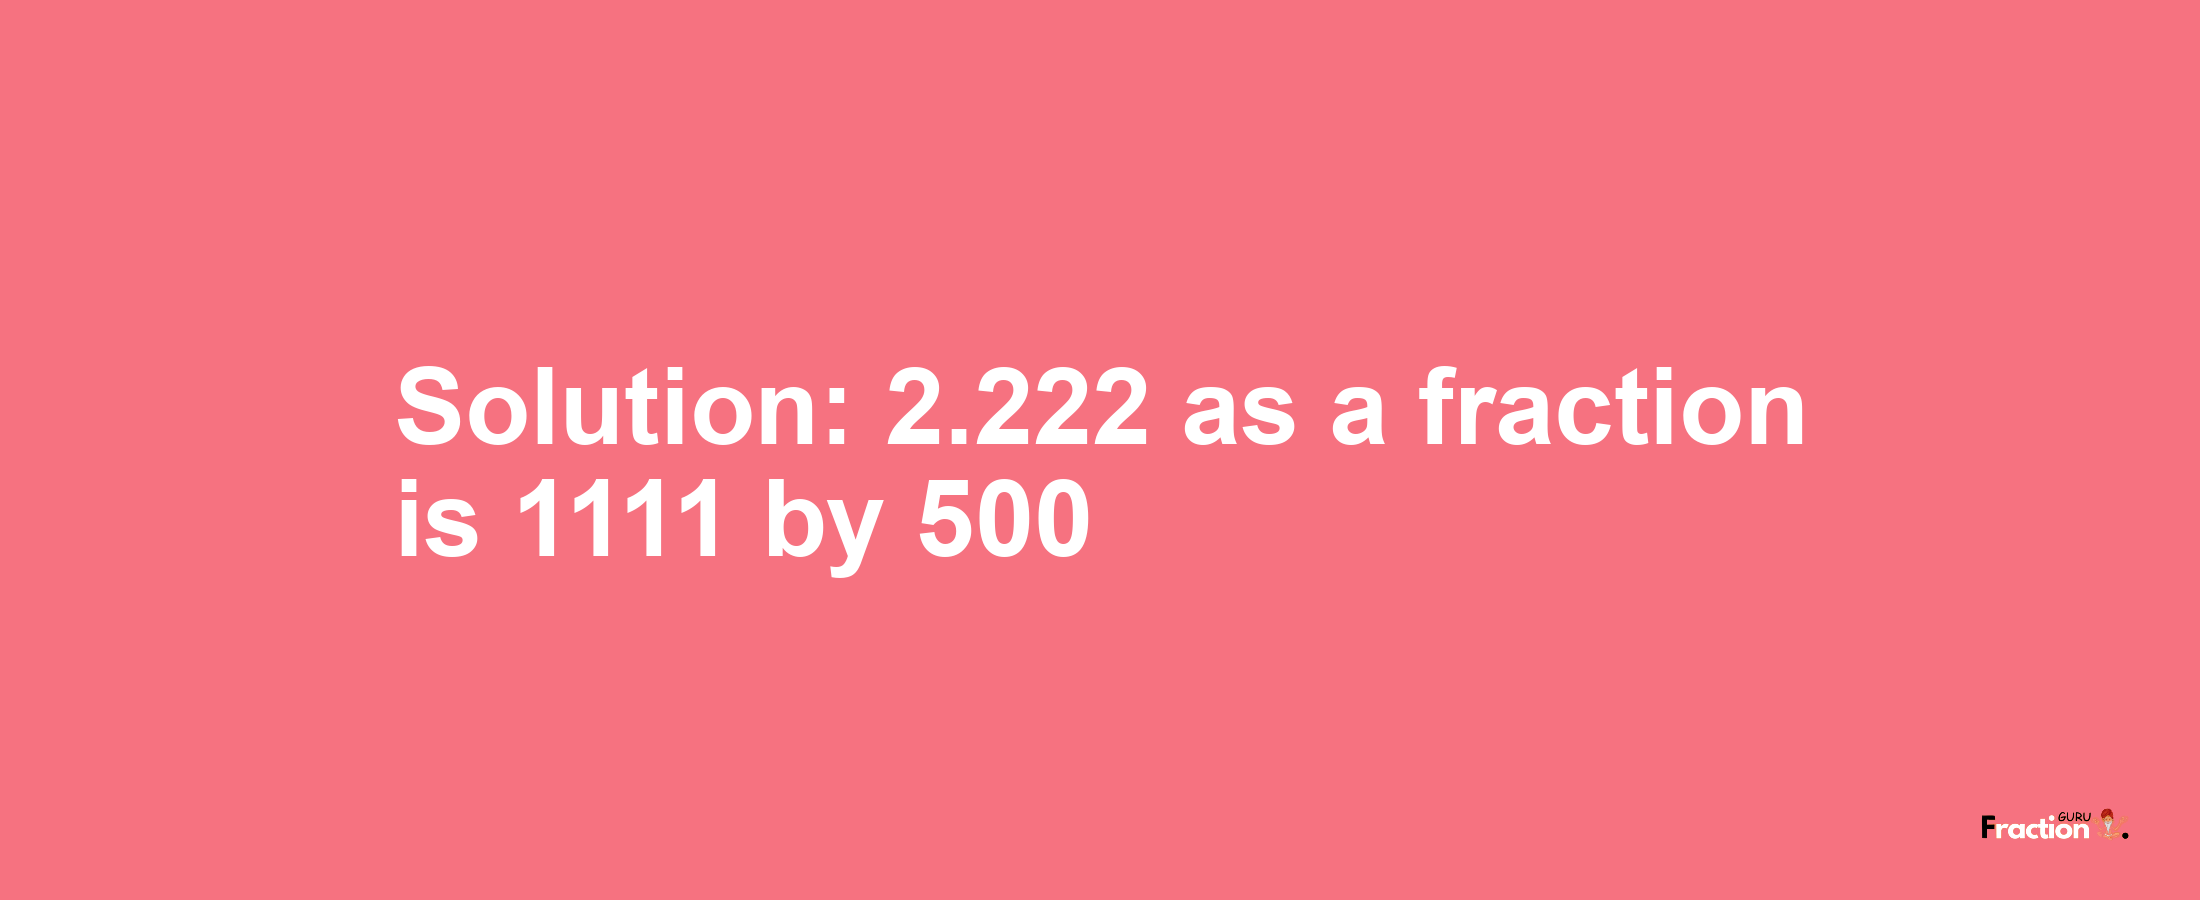 Solution:2.222 as a fraction is 1111/500